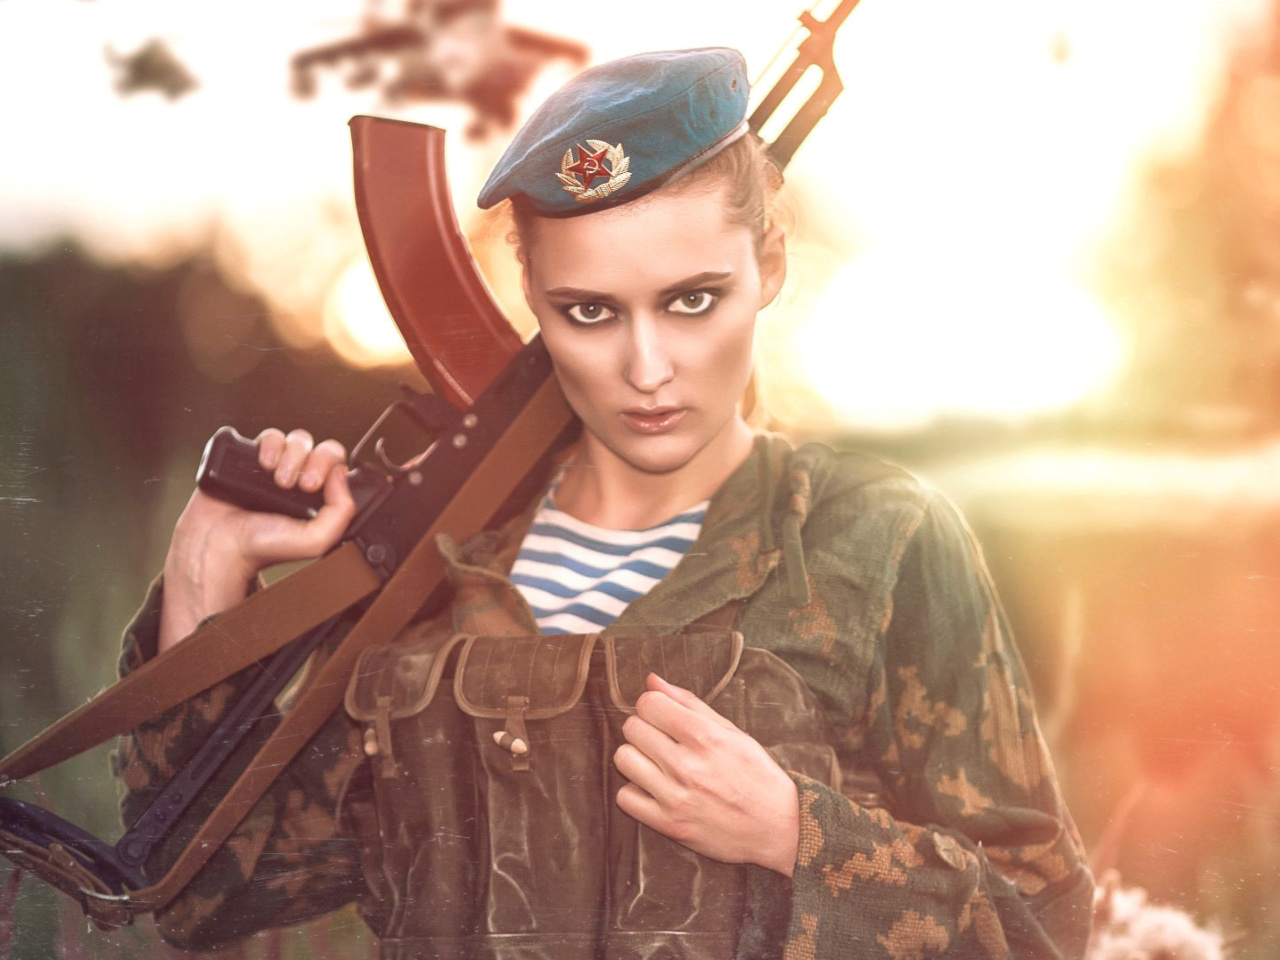 Russian Girl and Weapon HD wallpaper 1280x960